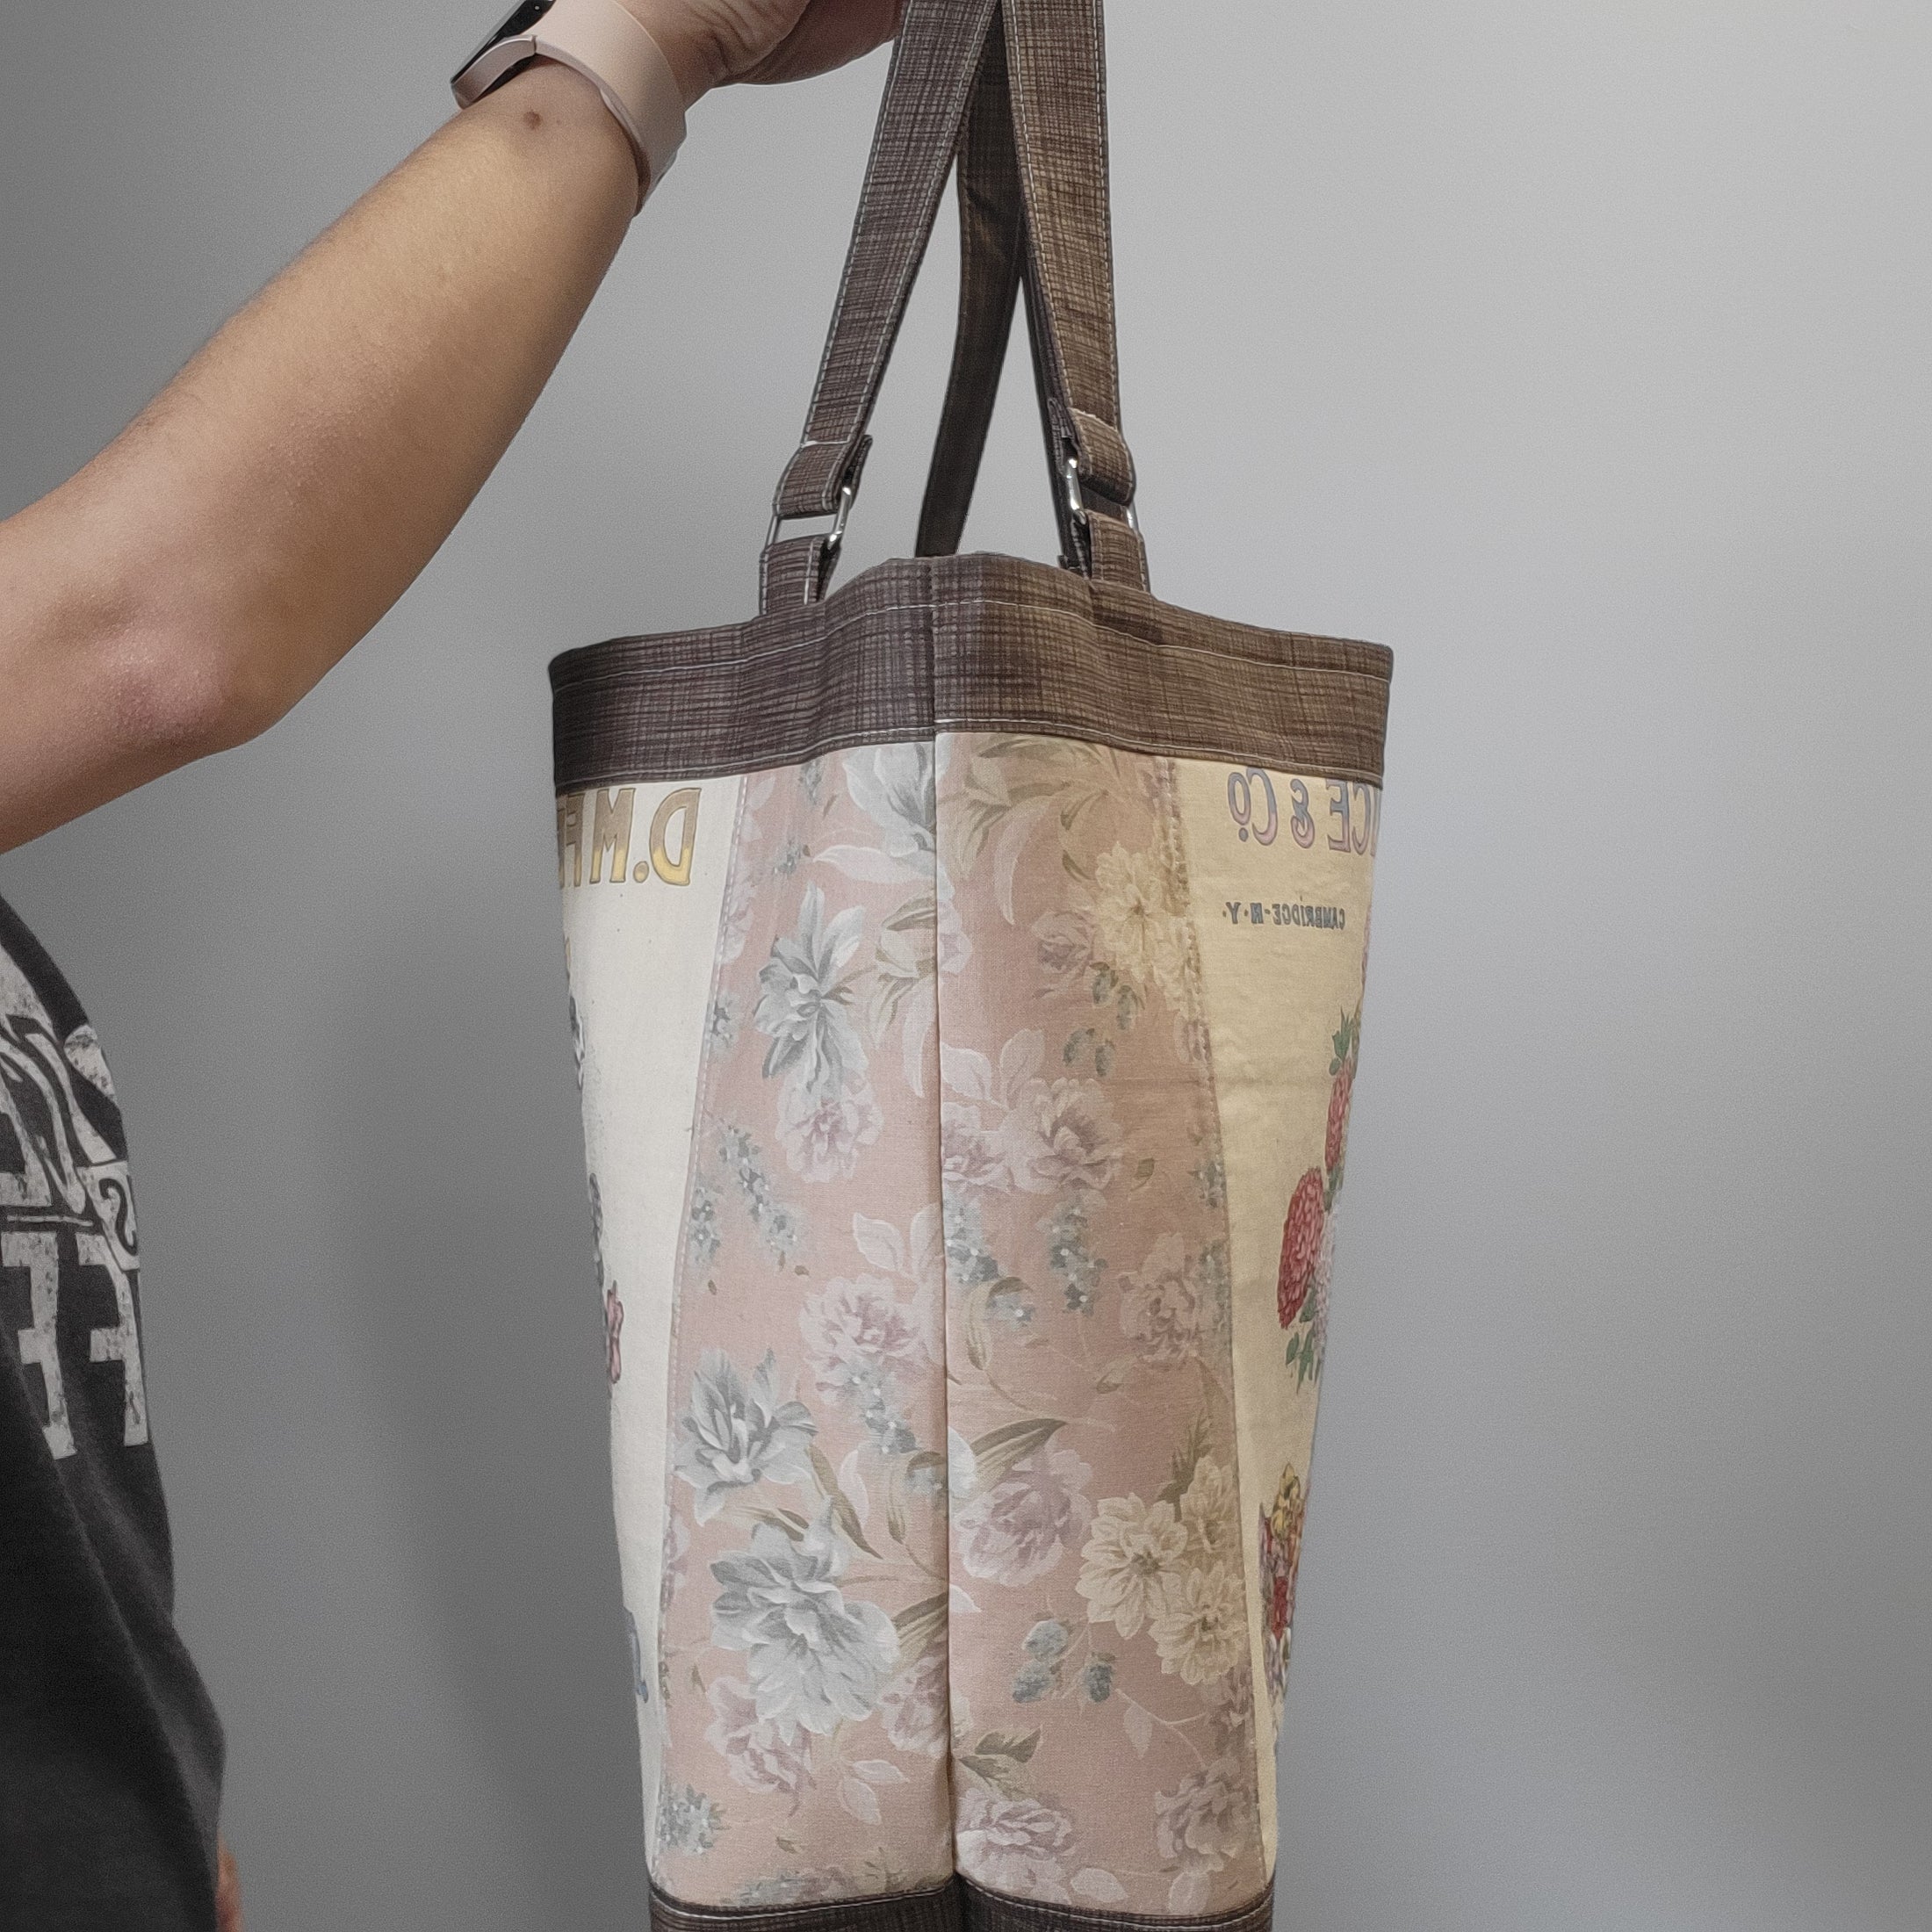 Side of the vintage flower seed tote bag featuring a muted floral fabric and brown accents.